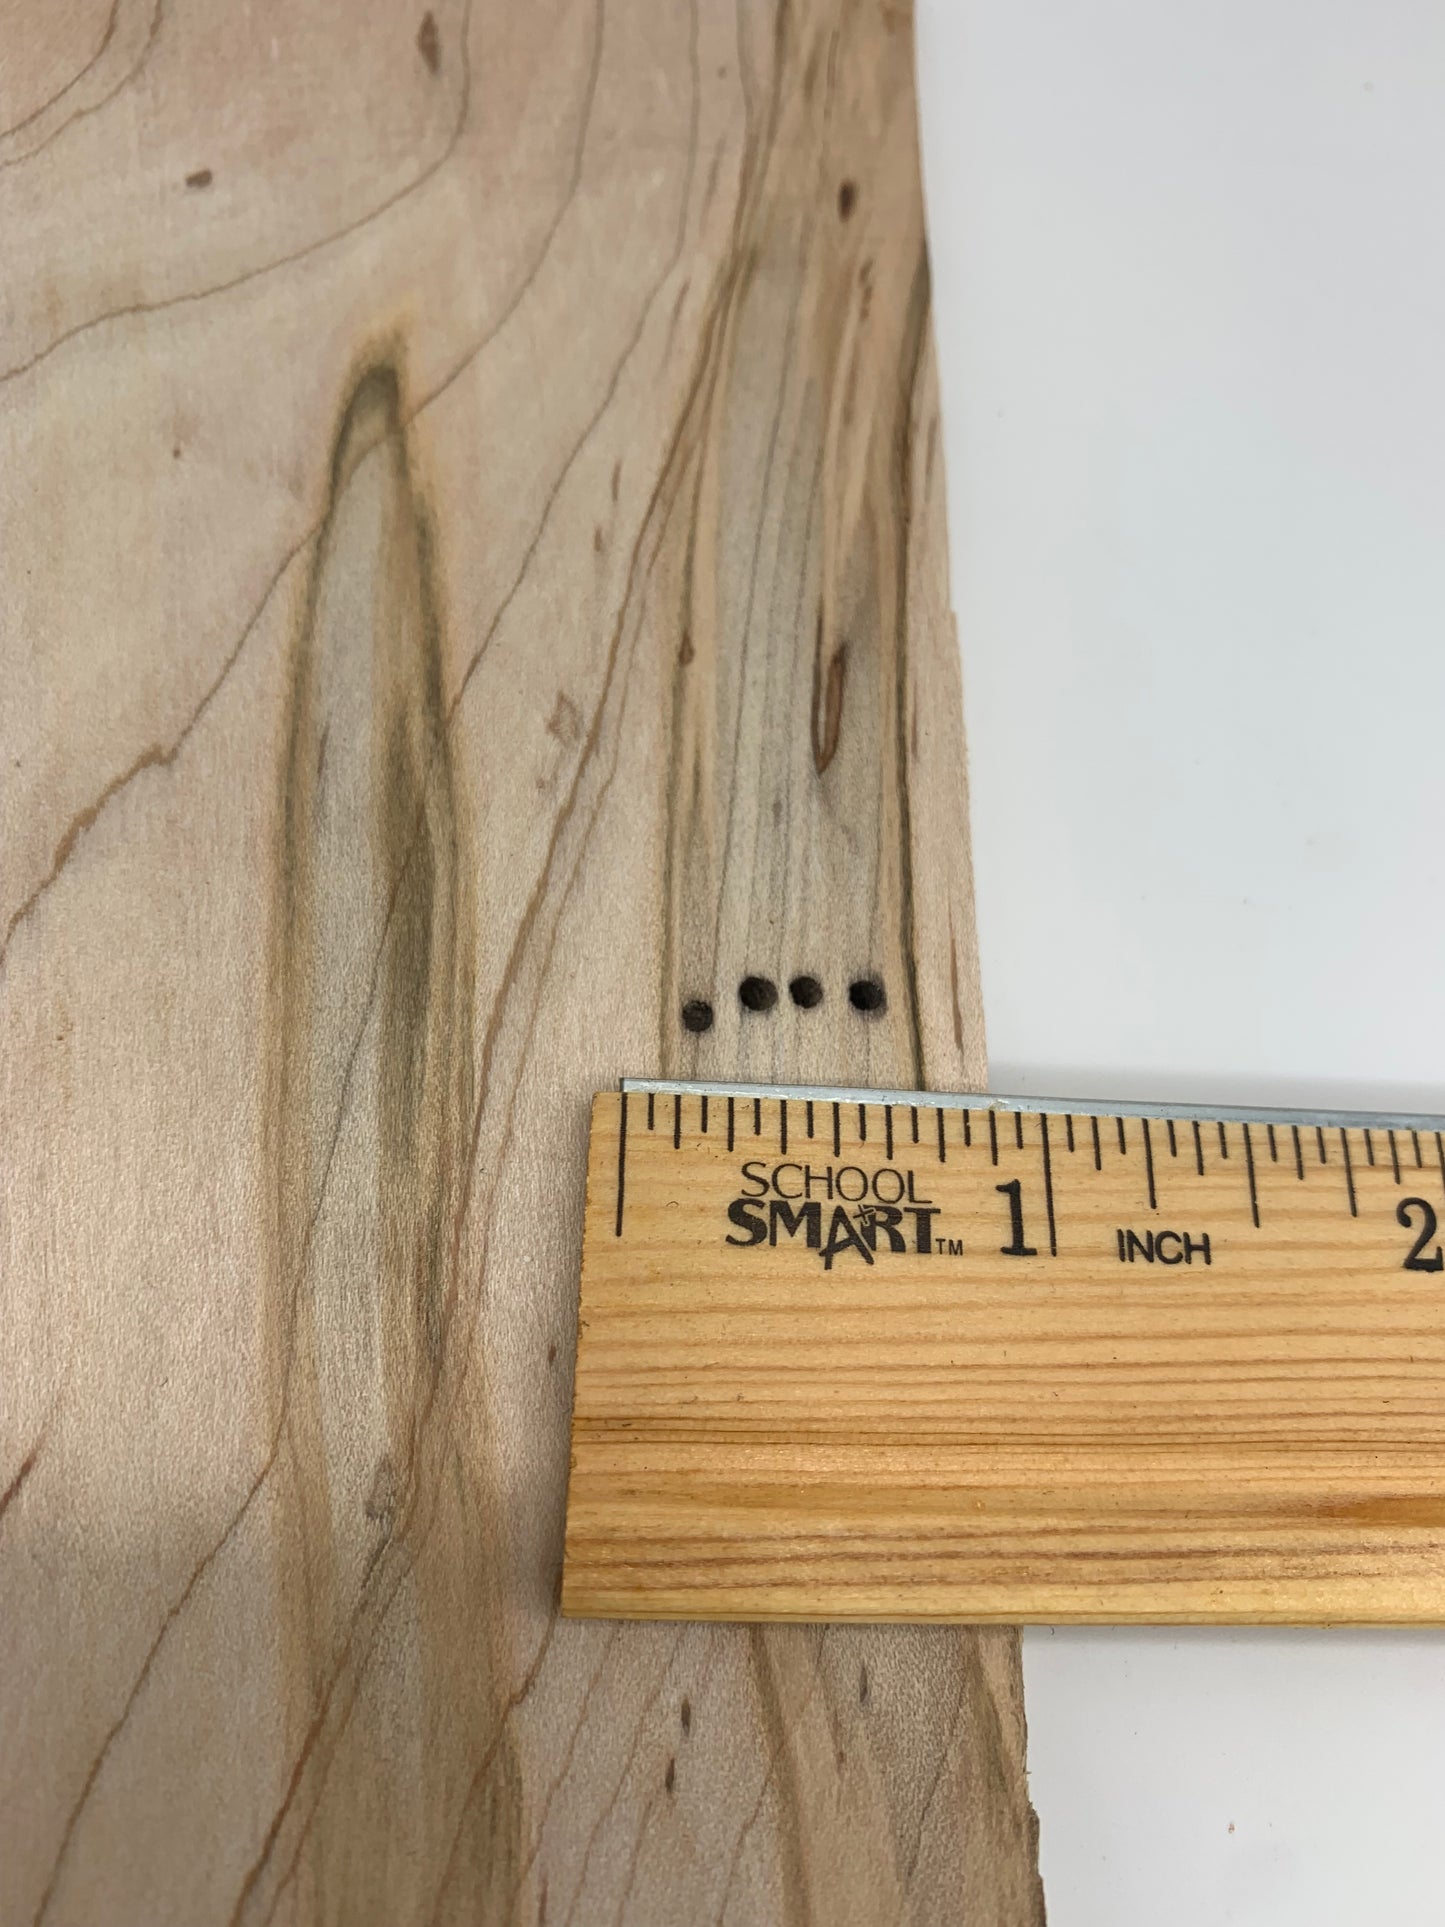 Ambrosia Maple Hardwood, 1/8 thick, perfect for laser cutting.